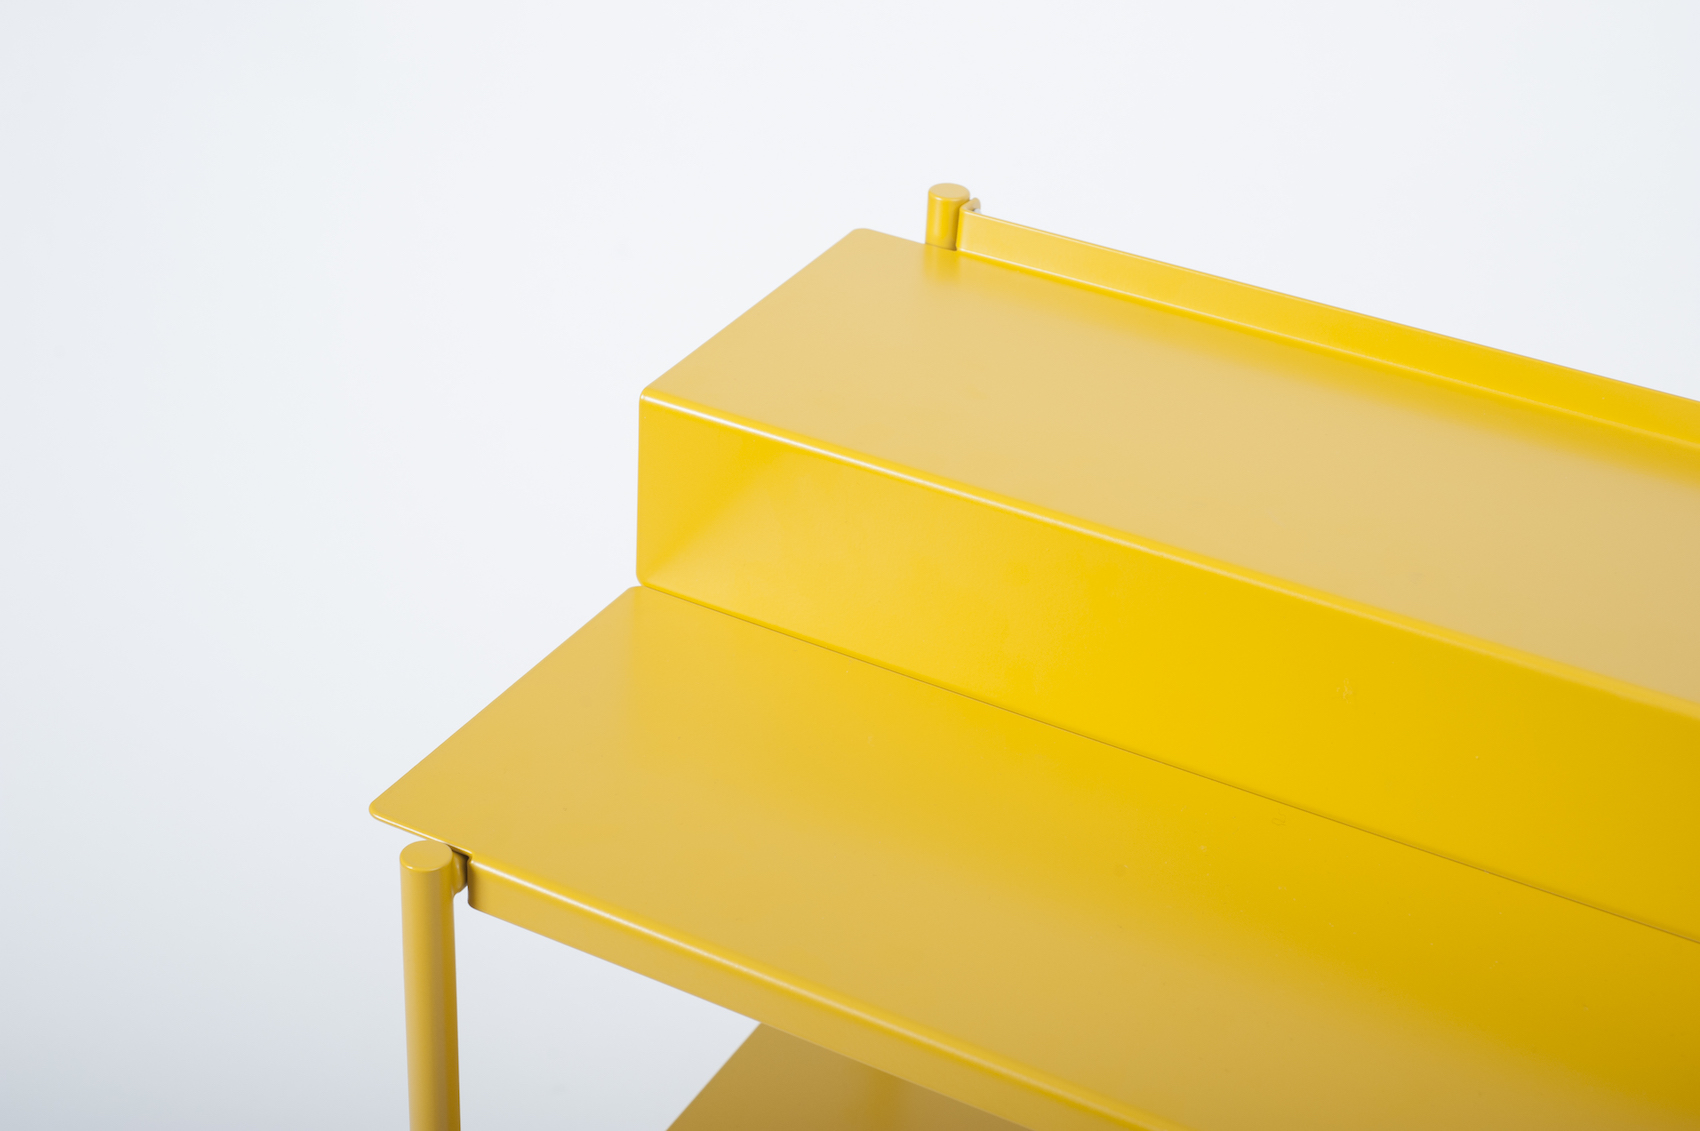 Minimalist Shelving System ''CHAN'' by Diiis